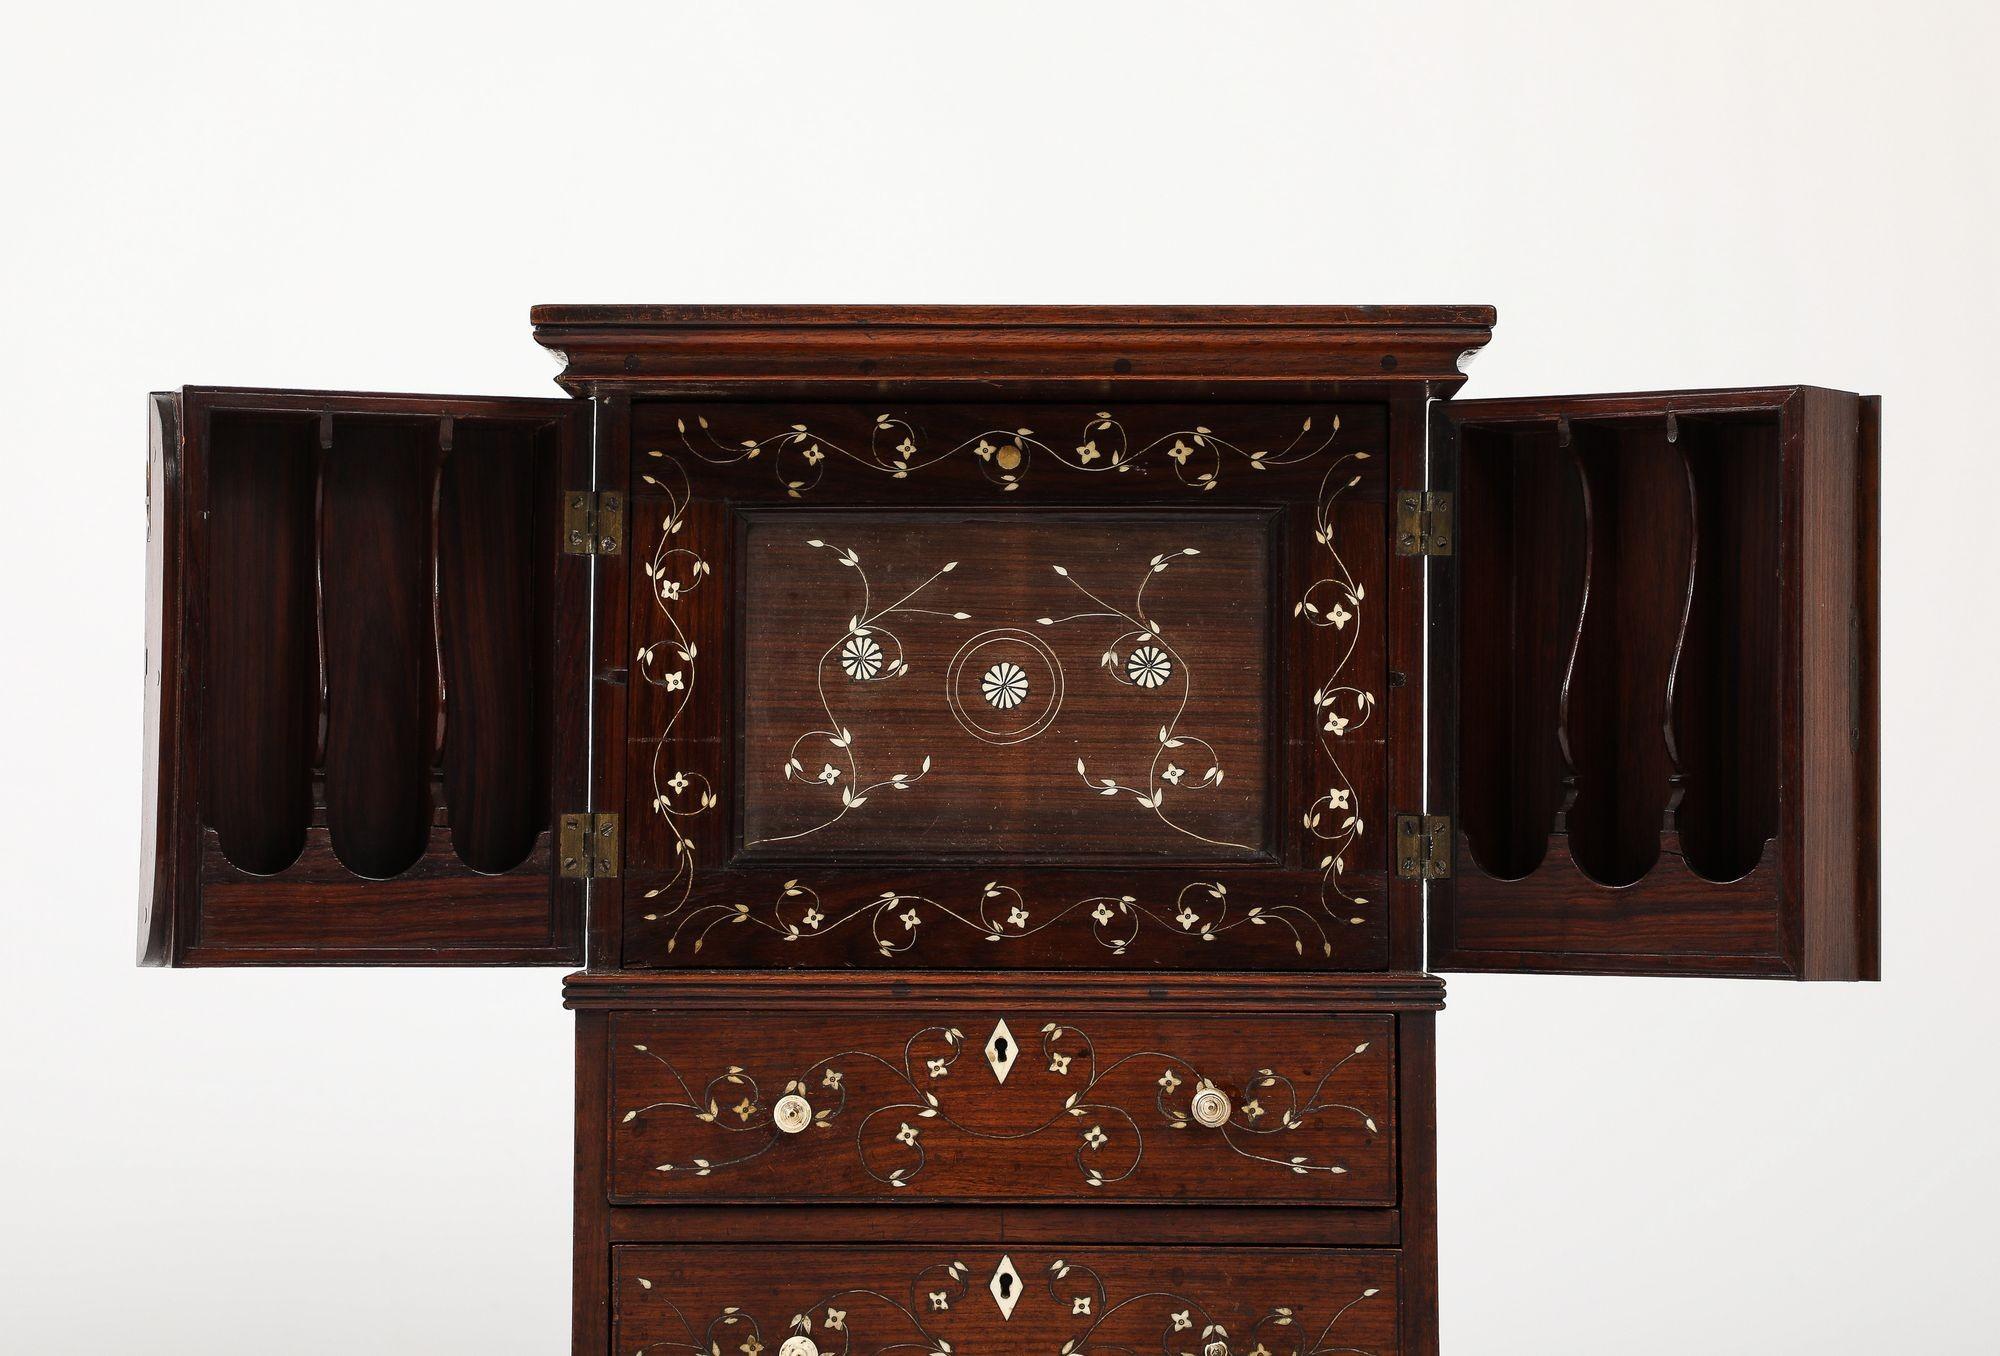 Inlay Indian Inlaid Table Top Cabinet For Sale